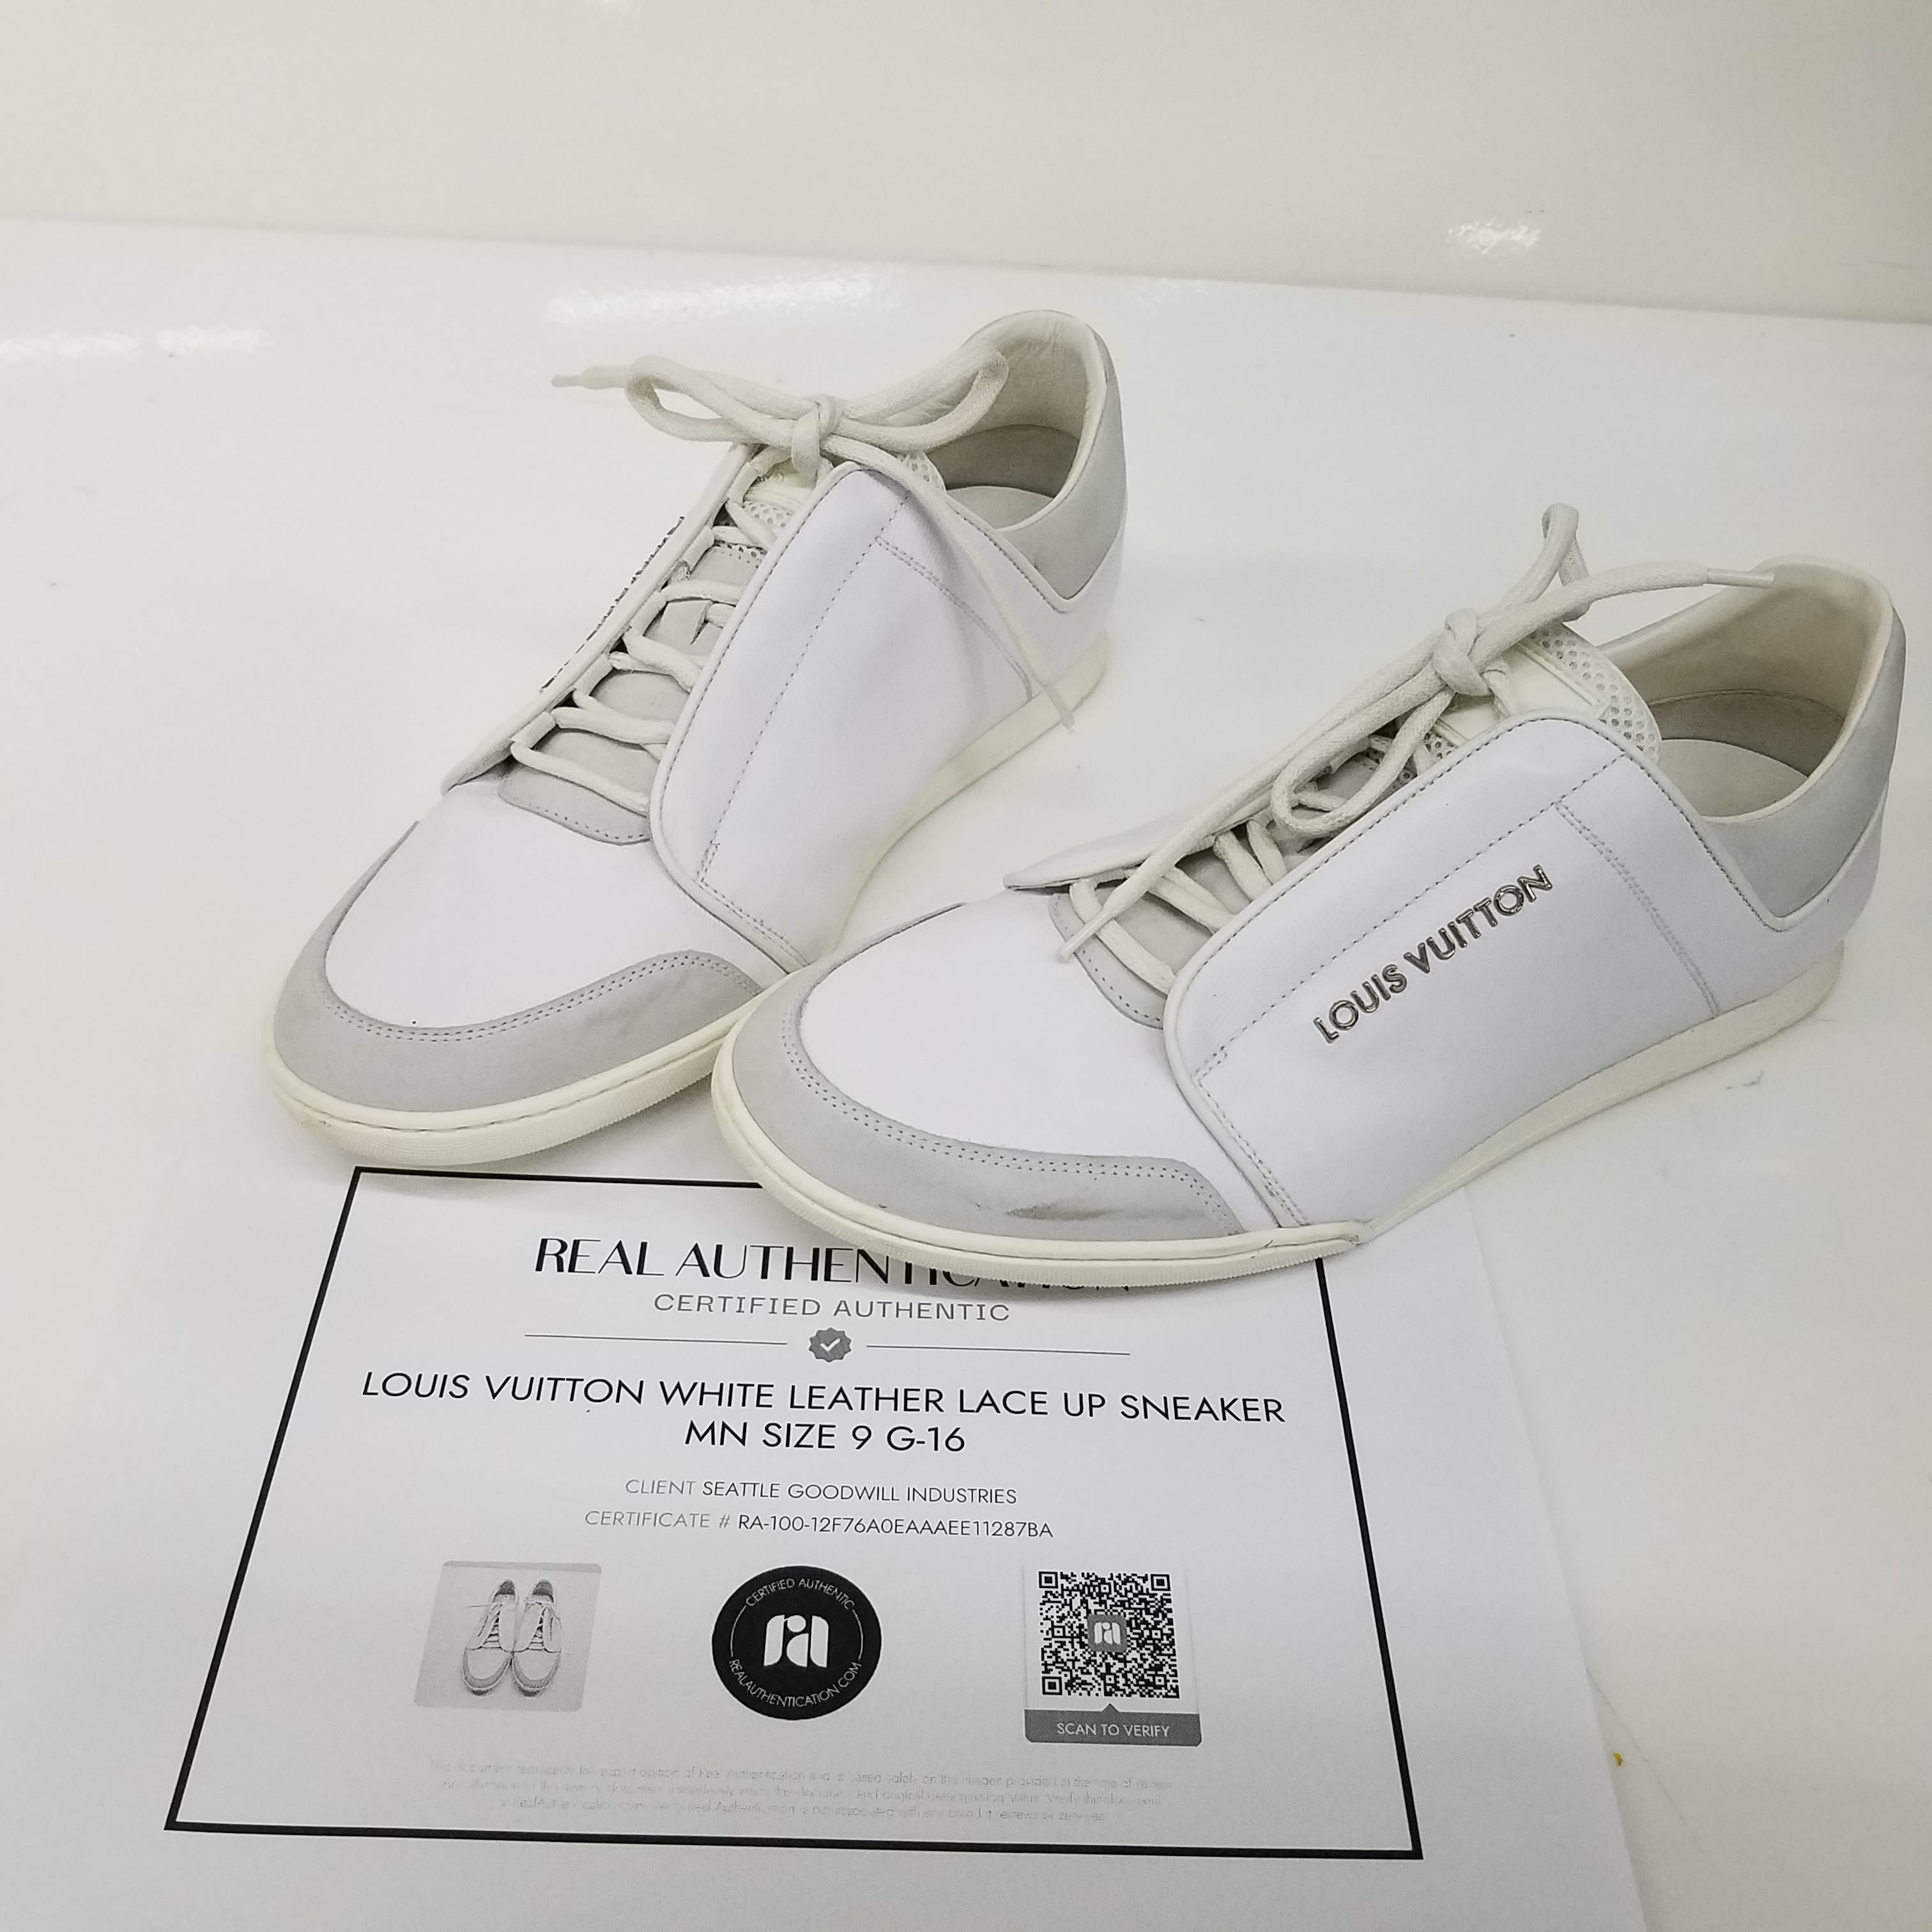 Buy Louis Vuitton LV6 White Leather Lace Up Sneakers Men's Size 9 for USD  399.99 | GoodwillFinds